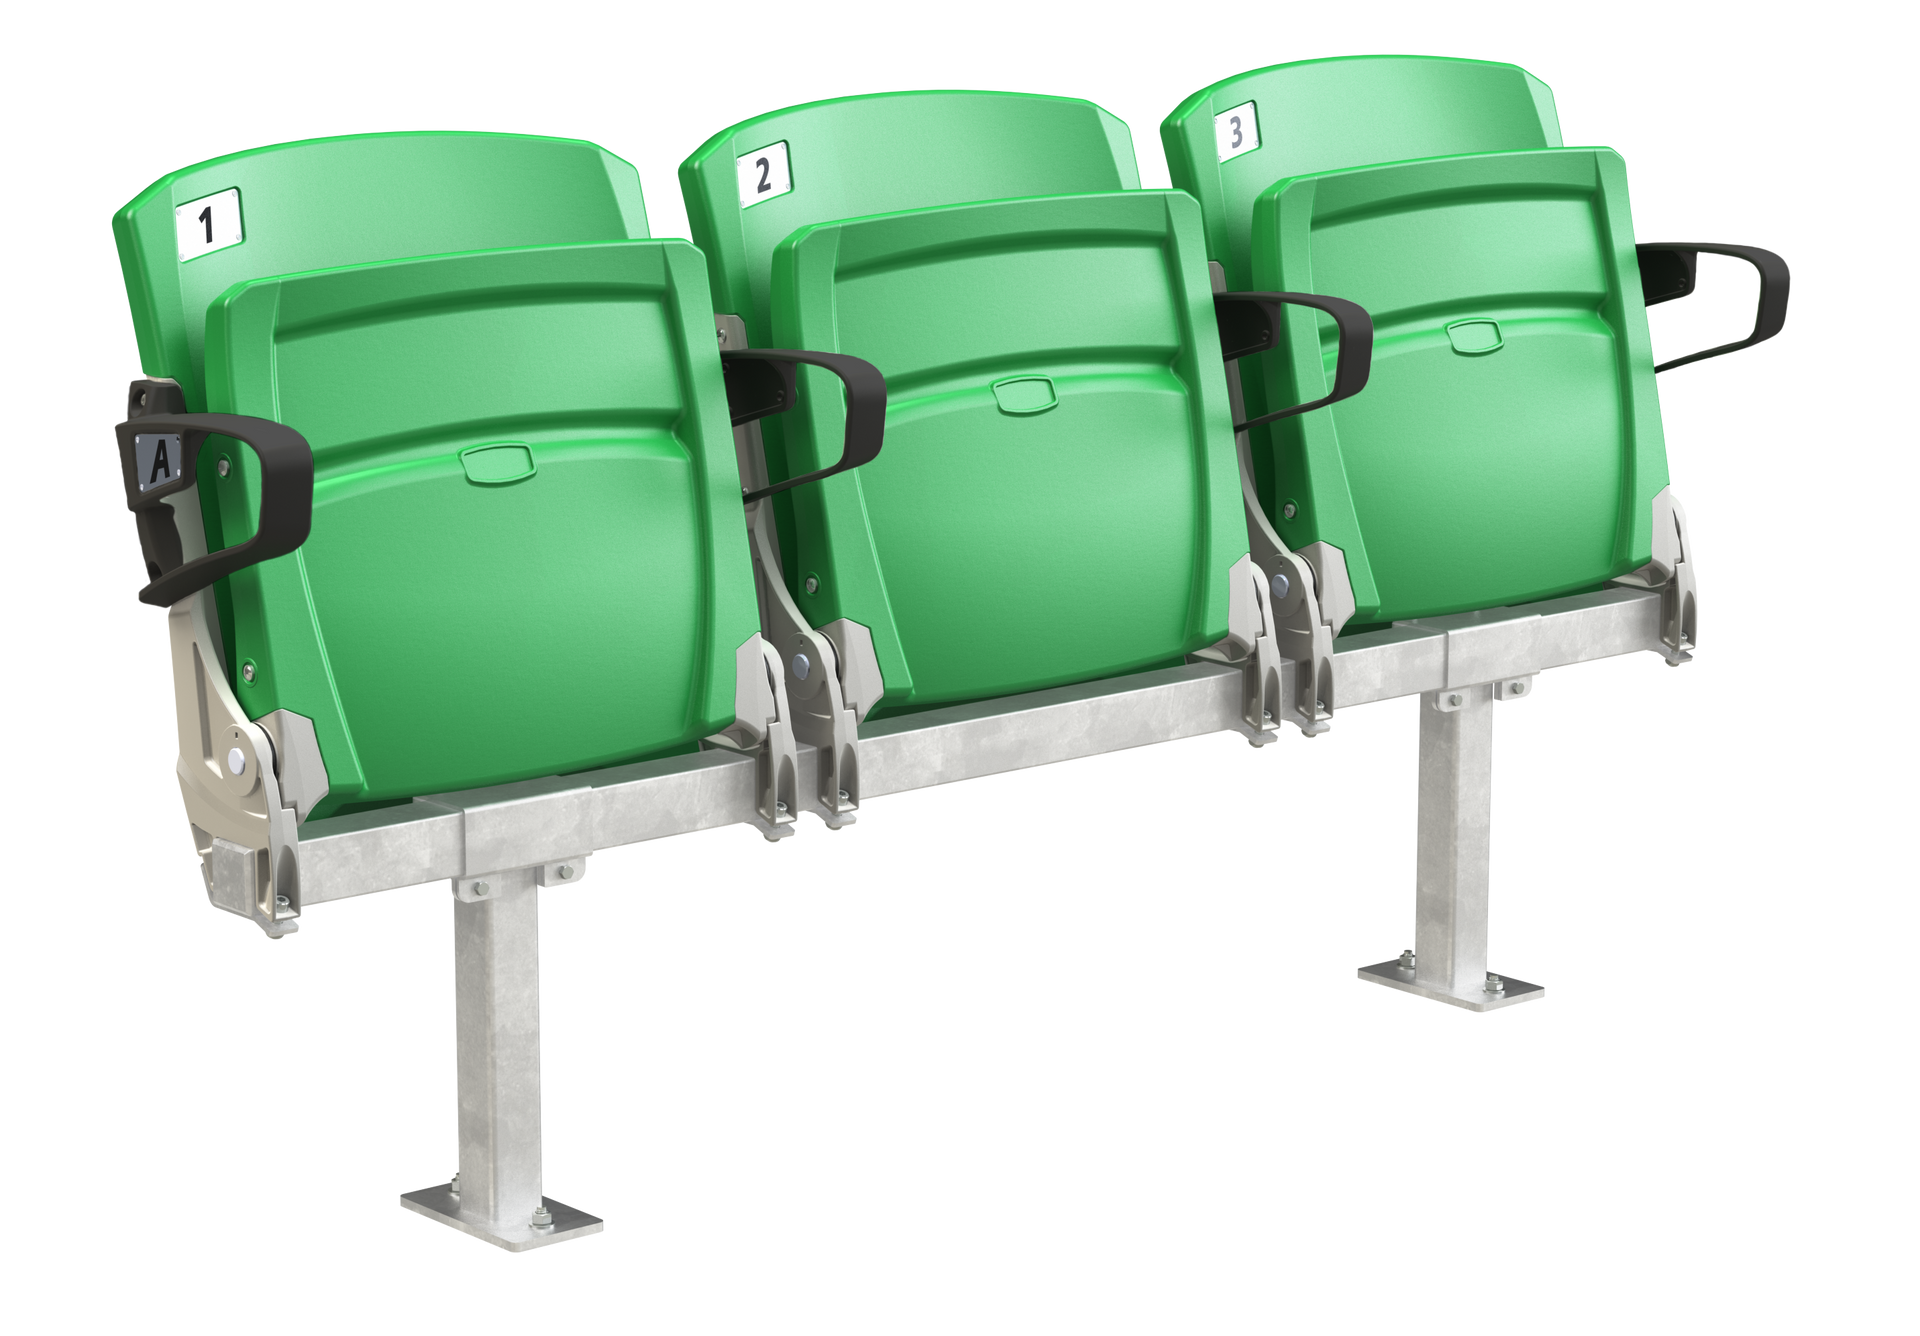 Three seat section of green VISION fixed chairs with armrests on a fixed base.